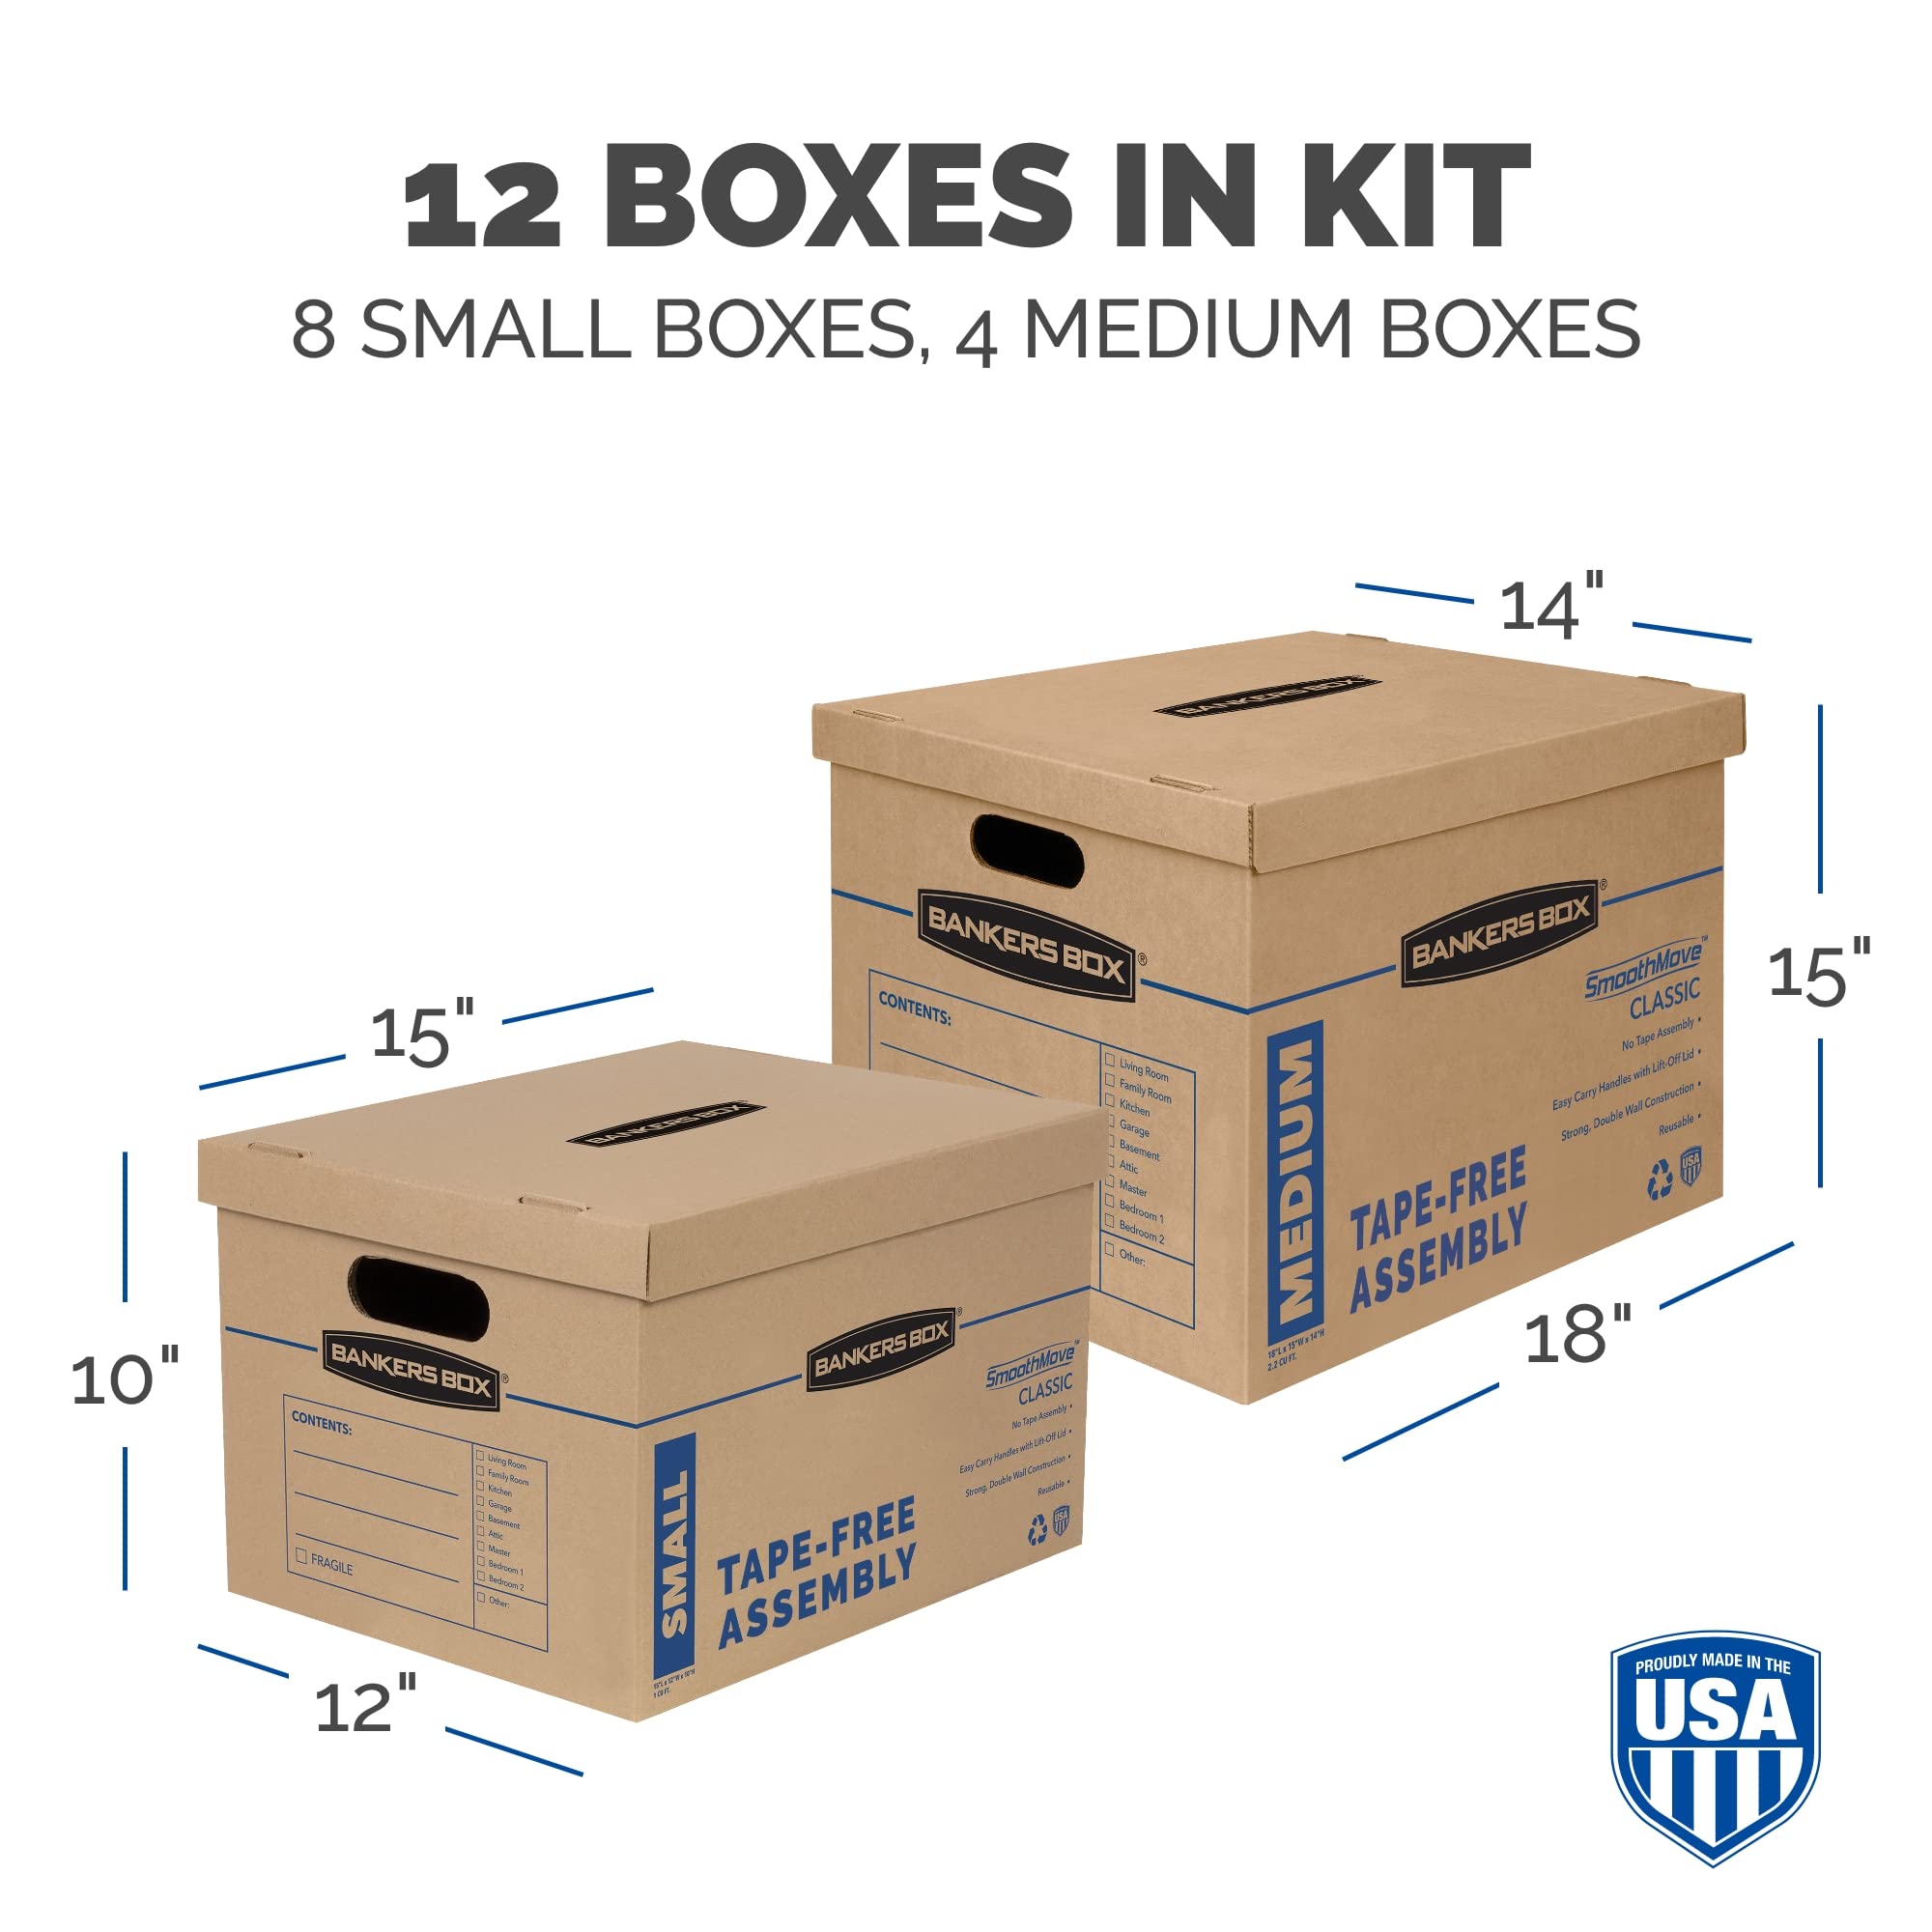 Bankers Box SmoothMove Classic Moving Boxes, Tape-Free Assembly, Easy Carry Handles, Brown, Assorted 12 Pack (7716401)